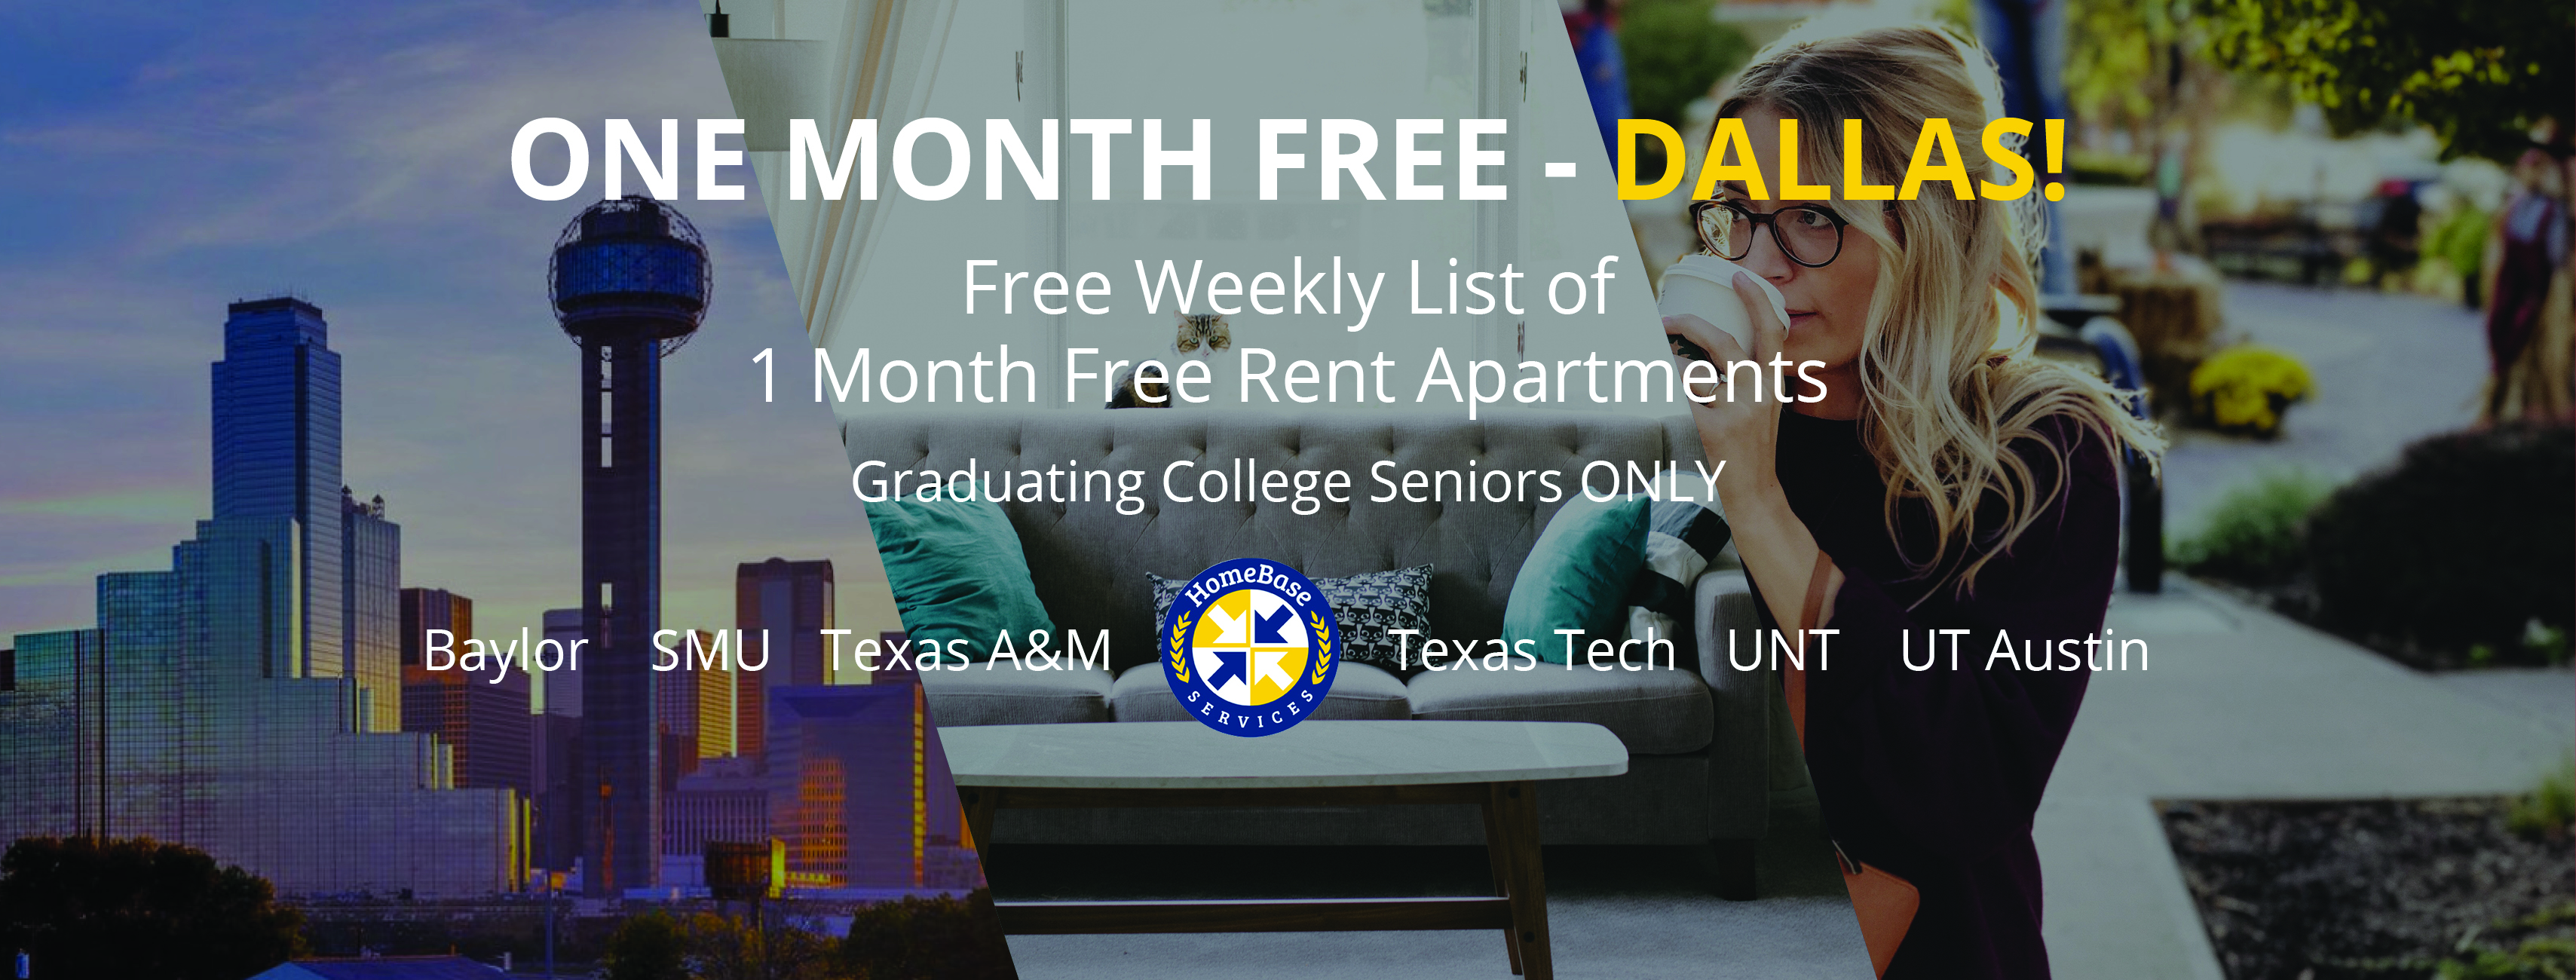 Weekly Free Rent Apartment Specials in Dallas & Houston – March 1 2018